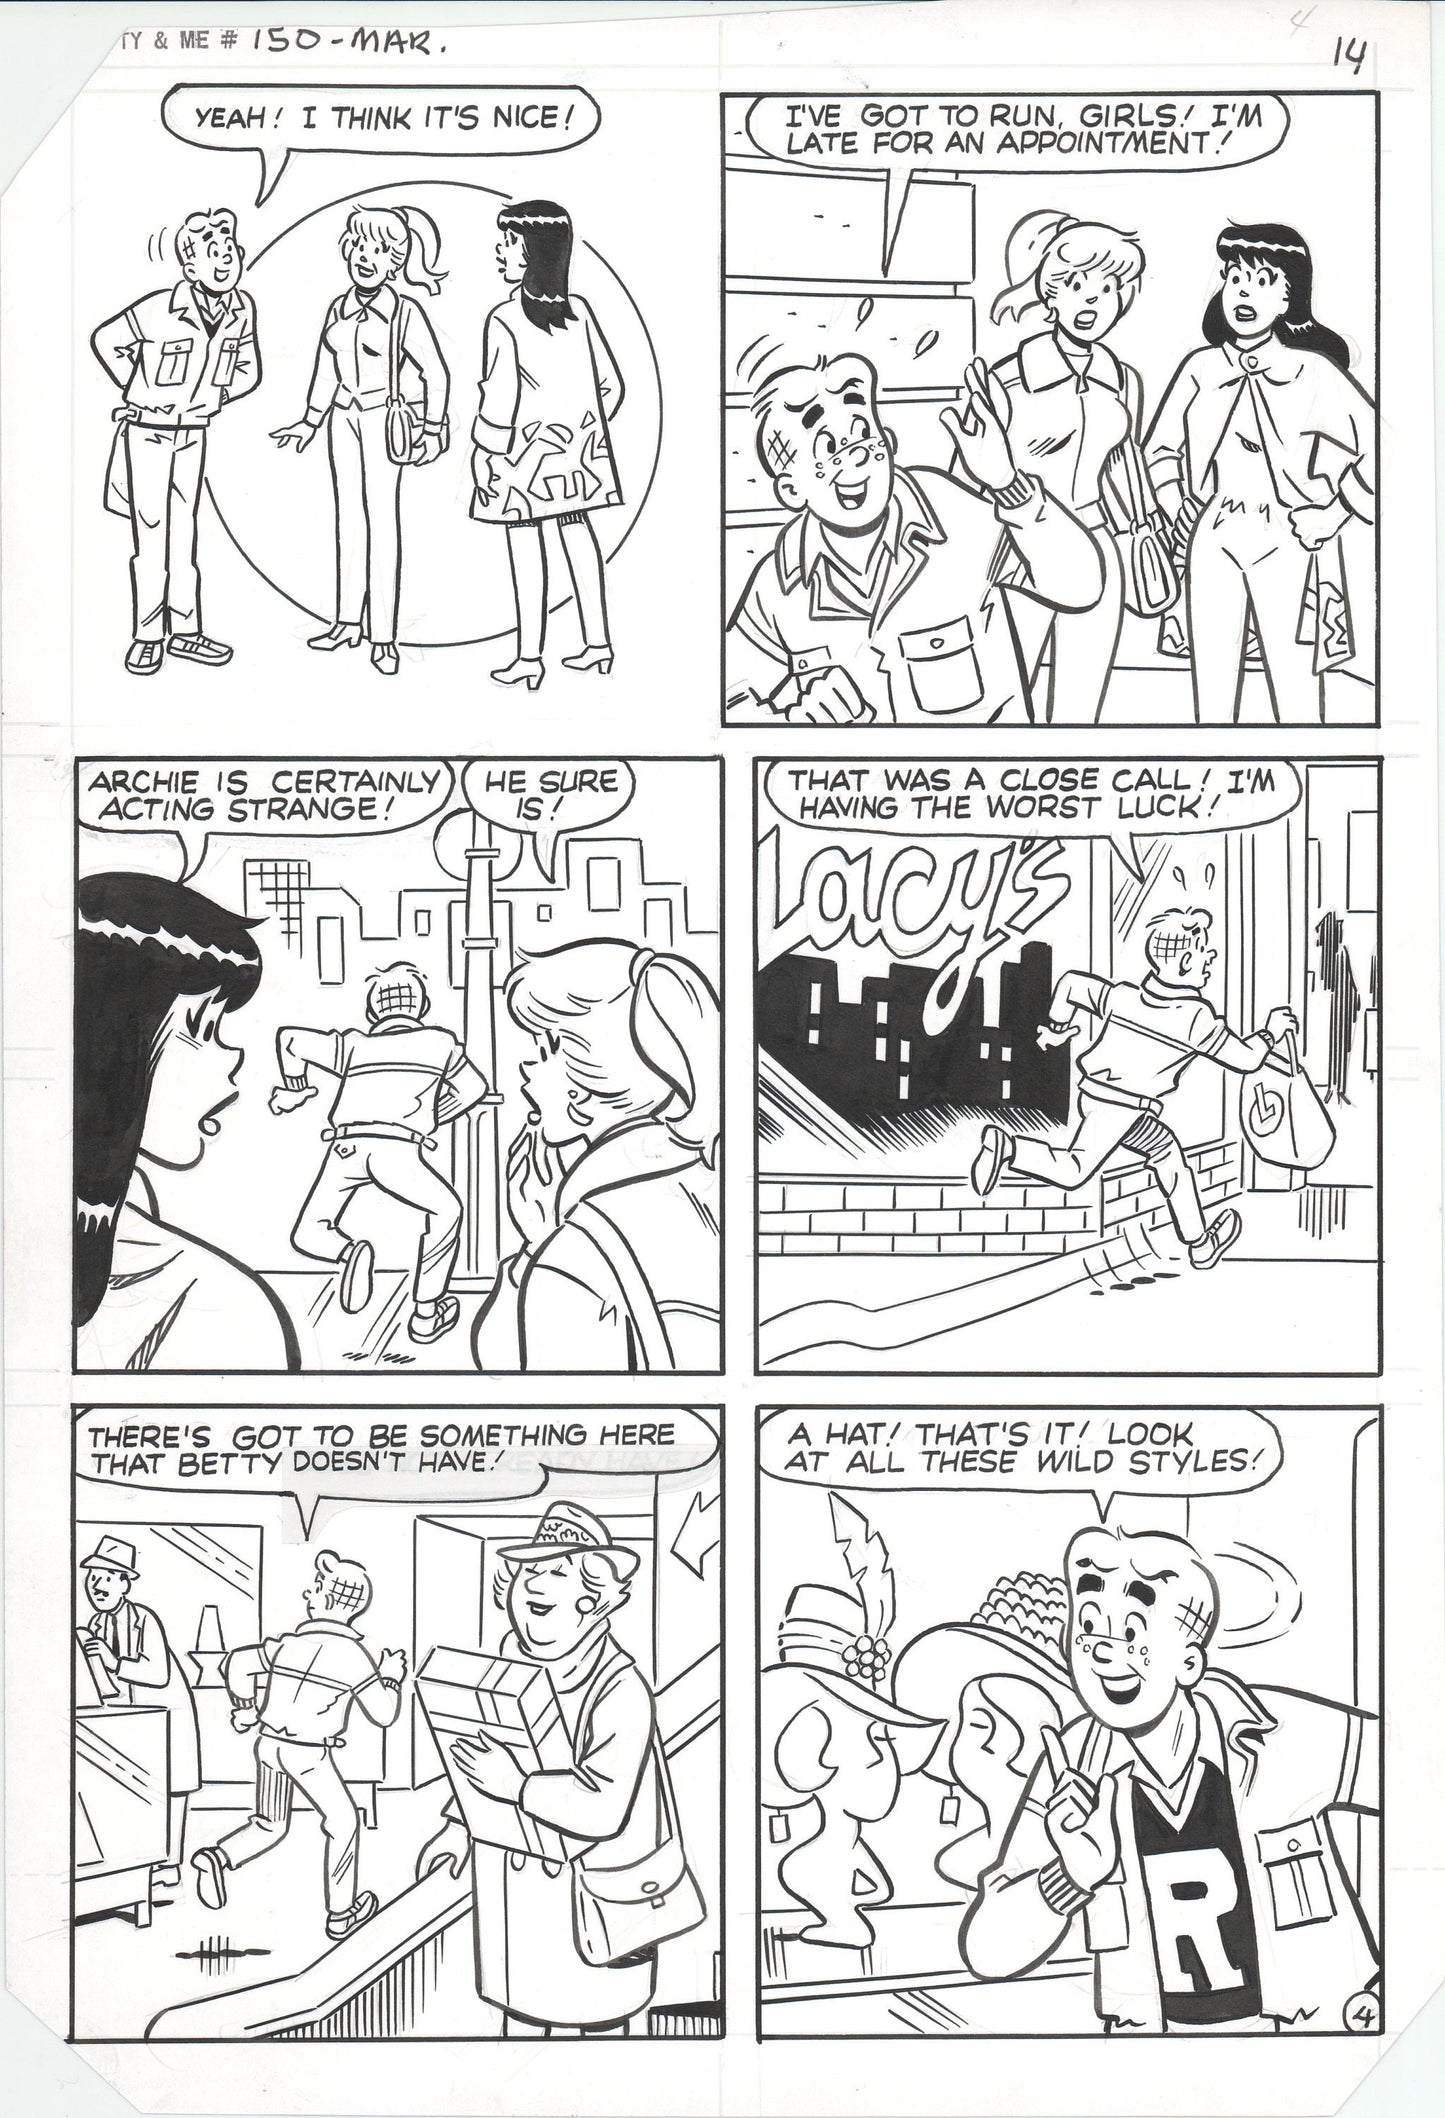 Archie 1986 Betty and Me Original Hand-inked comic page #150 by Stan Goldberg Rudy Lapick and Mark Esposito p14